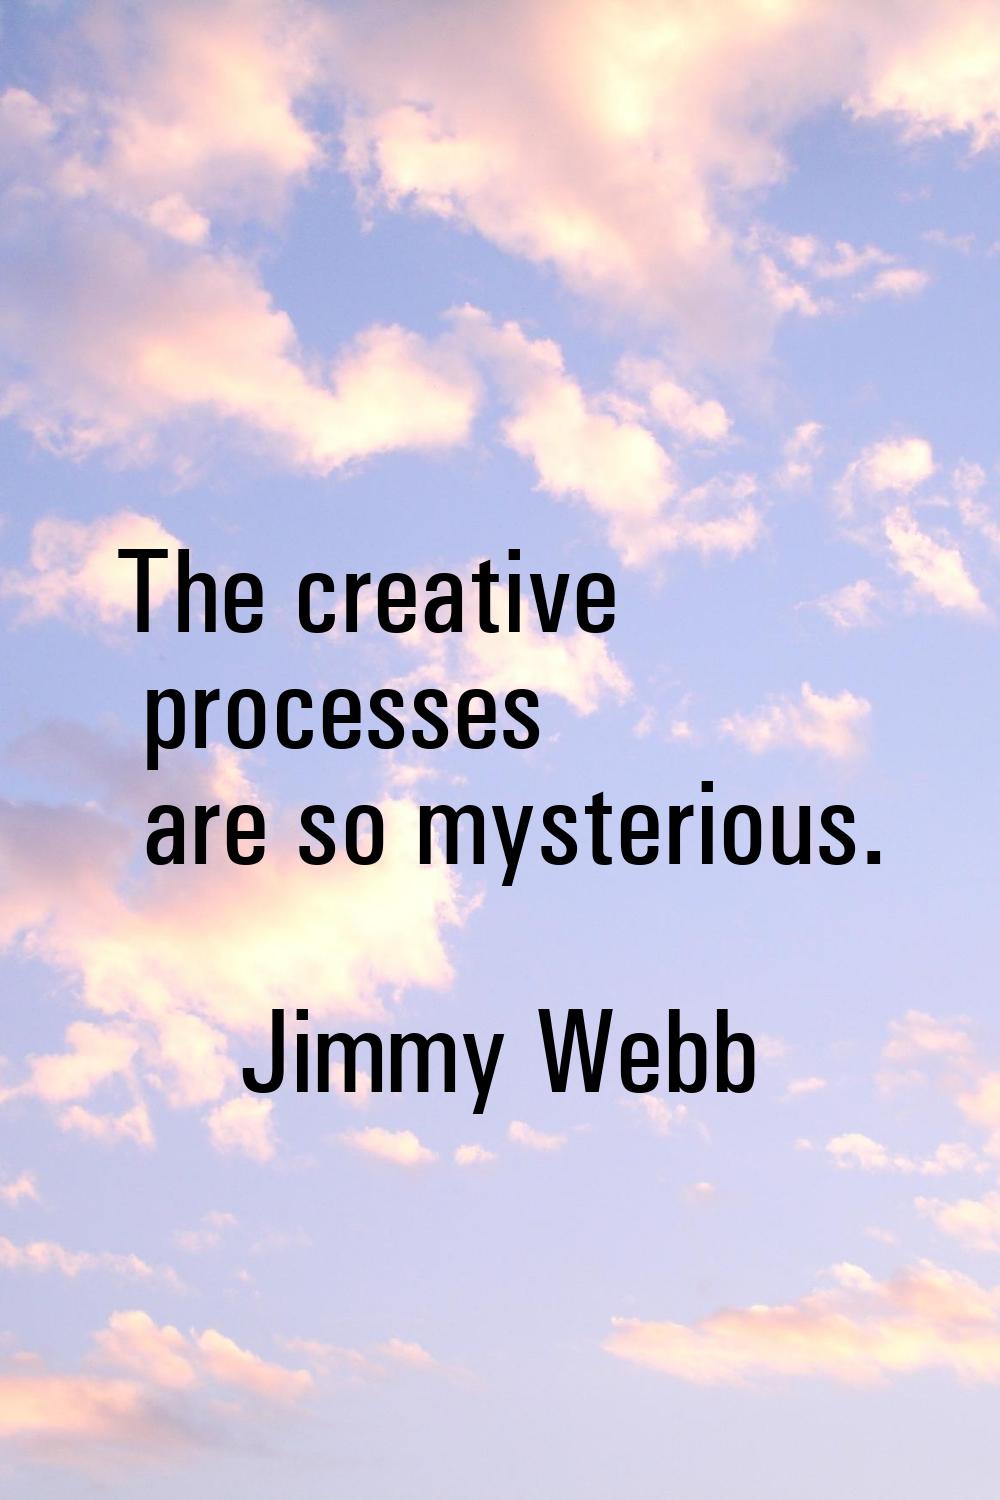 The creative processes are so mysterious.